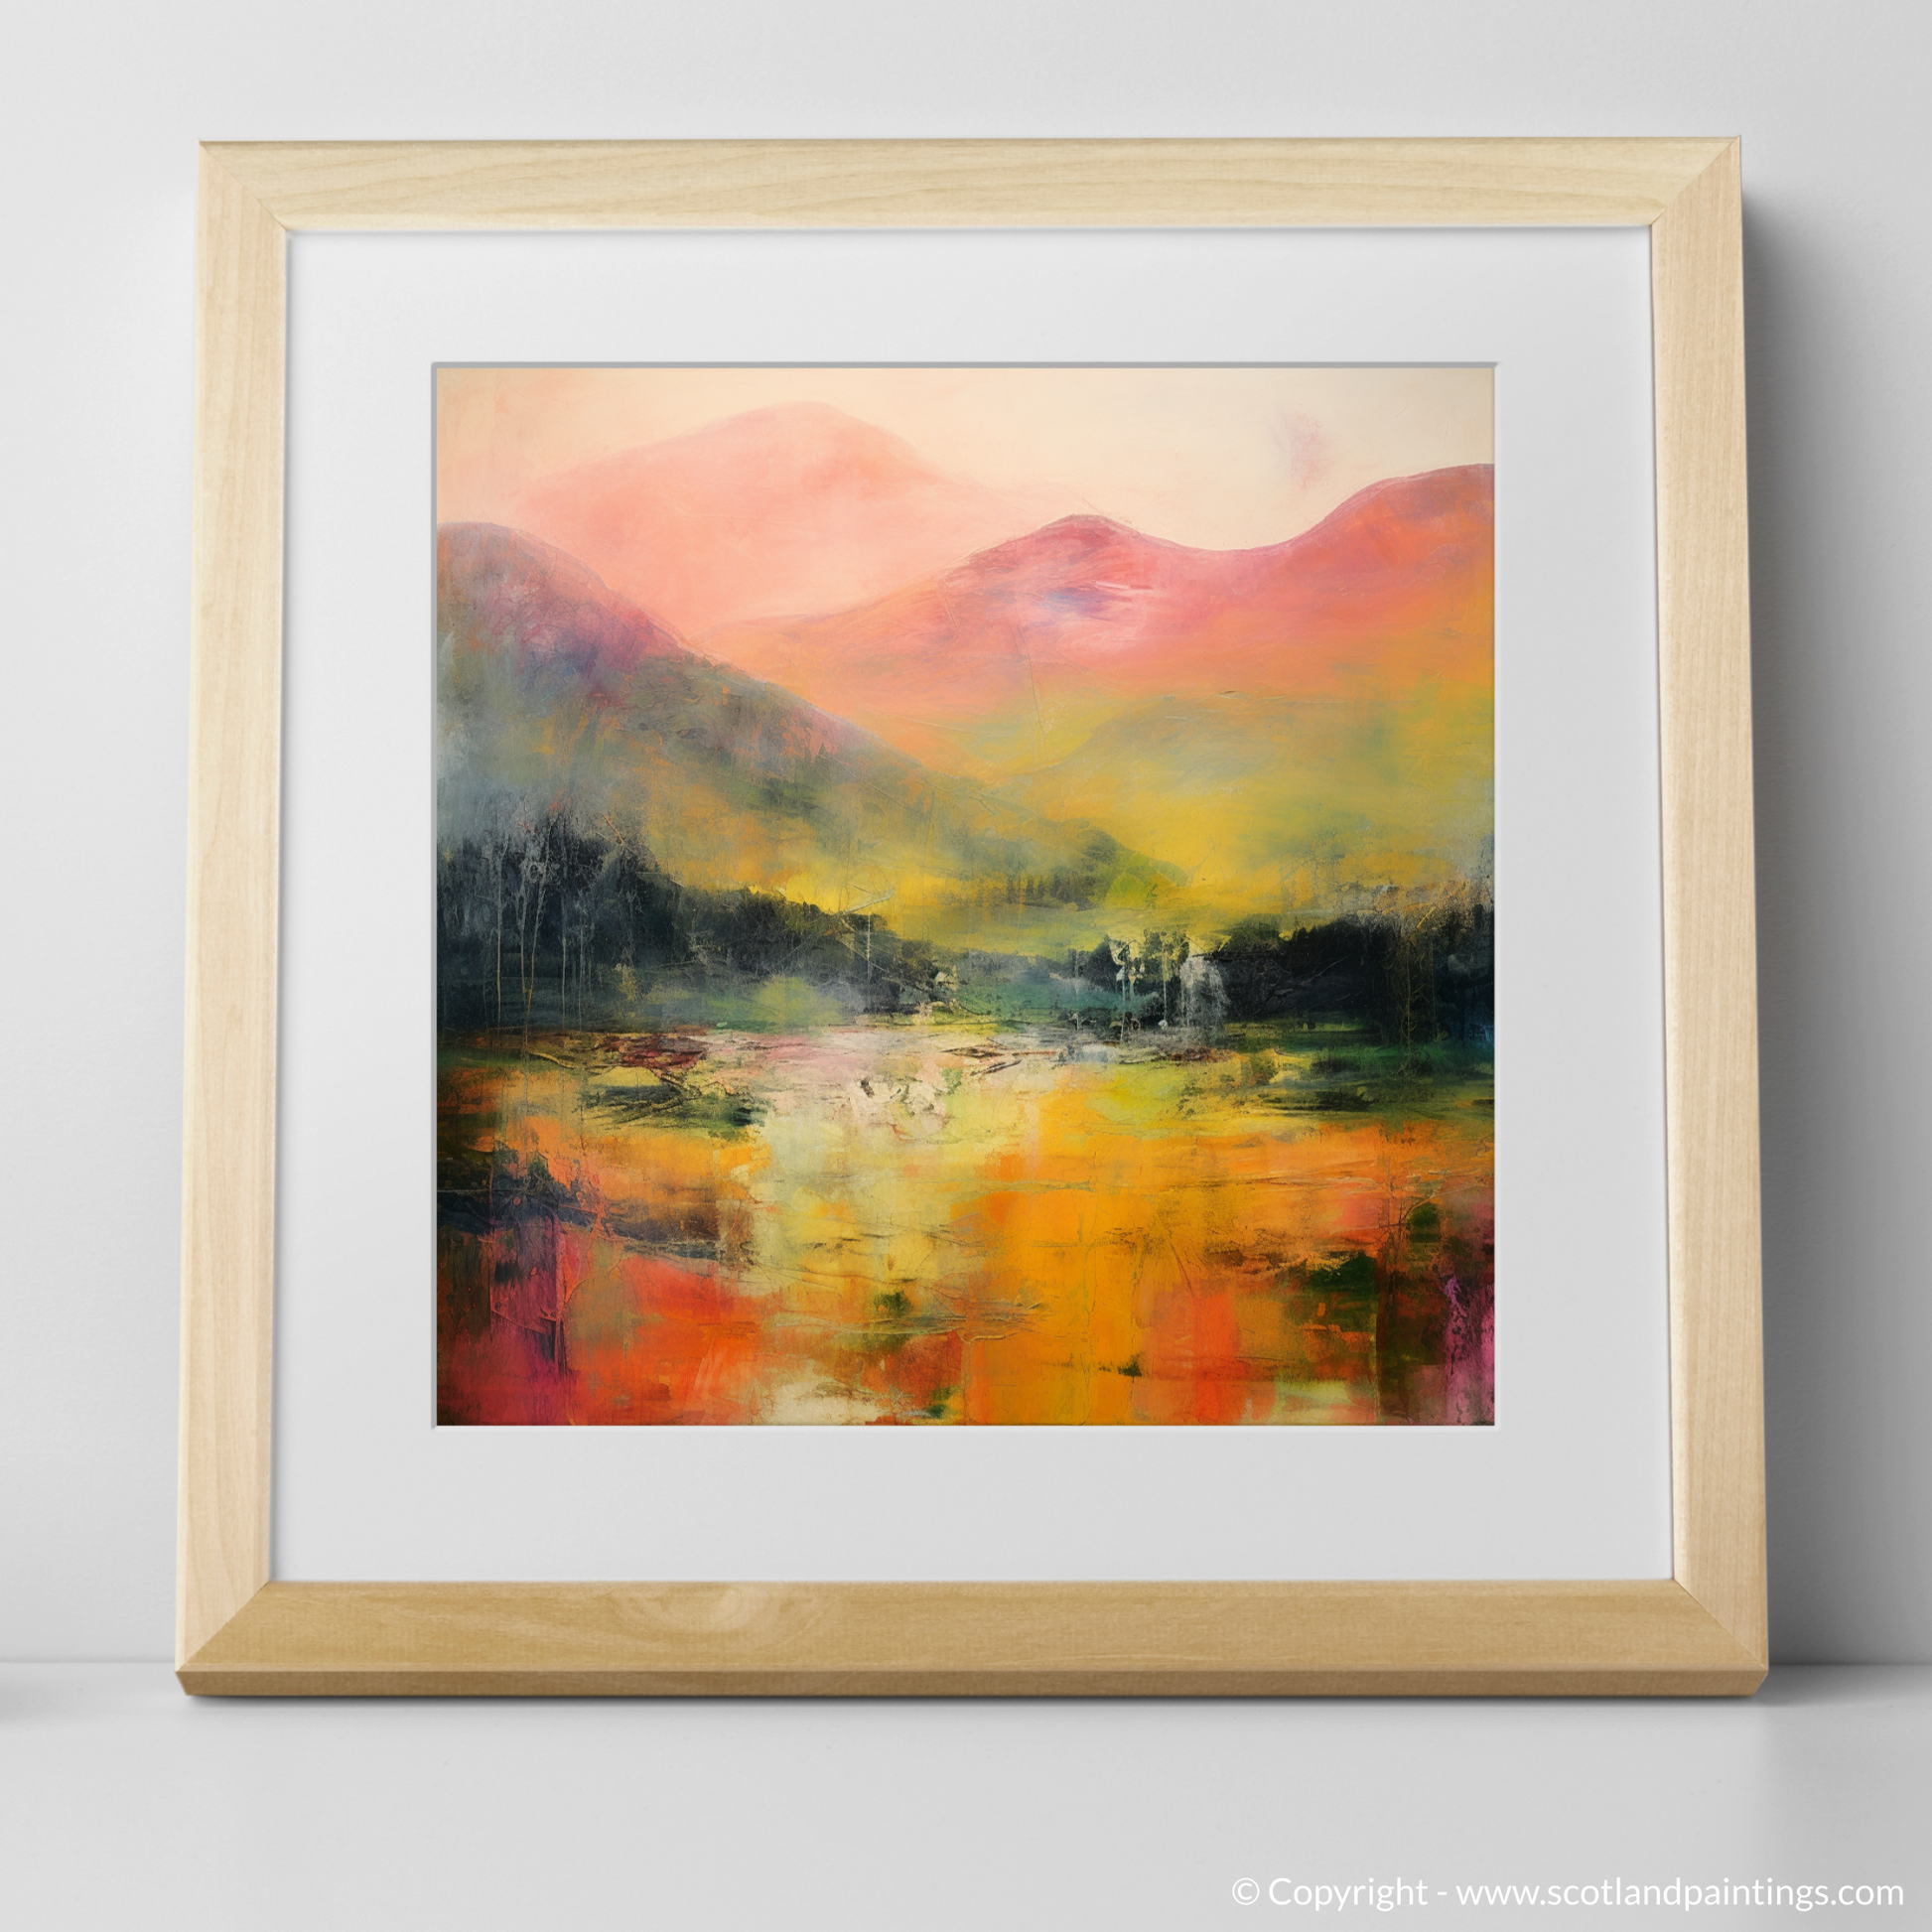 Art Print of Glen Orchy, Argyll and Bute with a natural frame